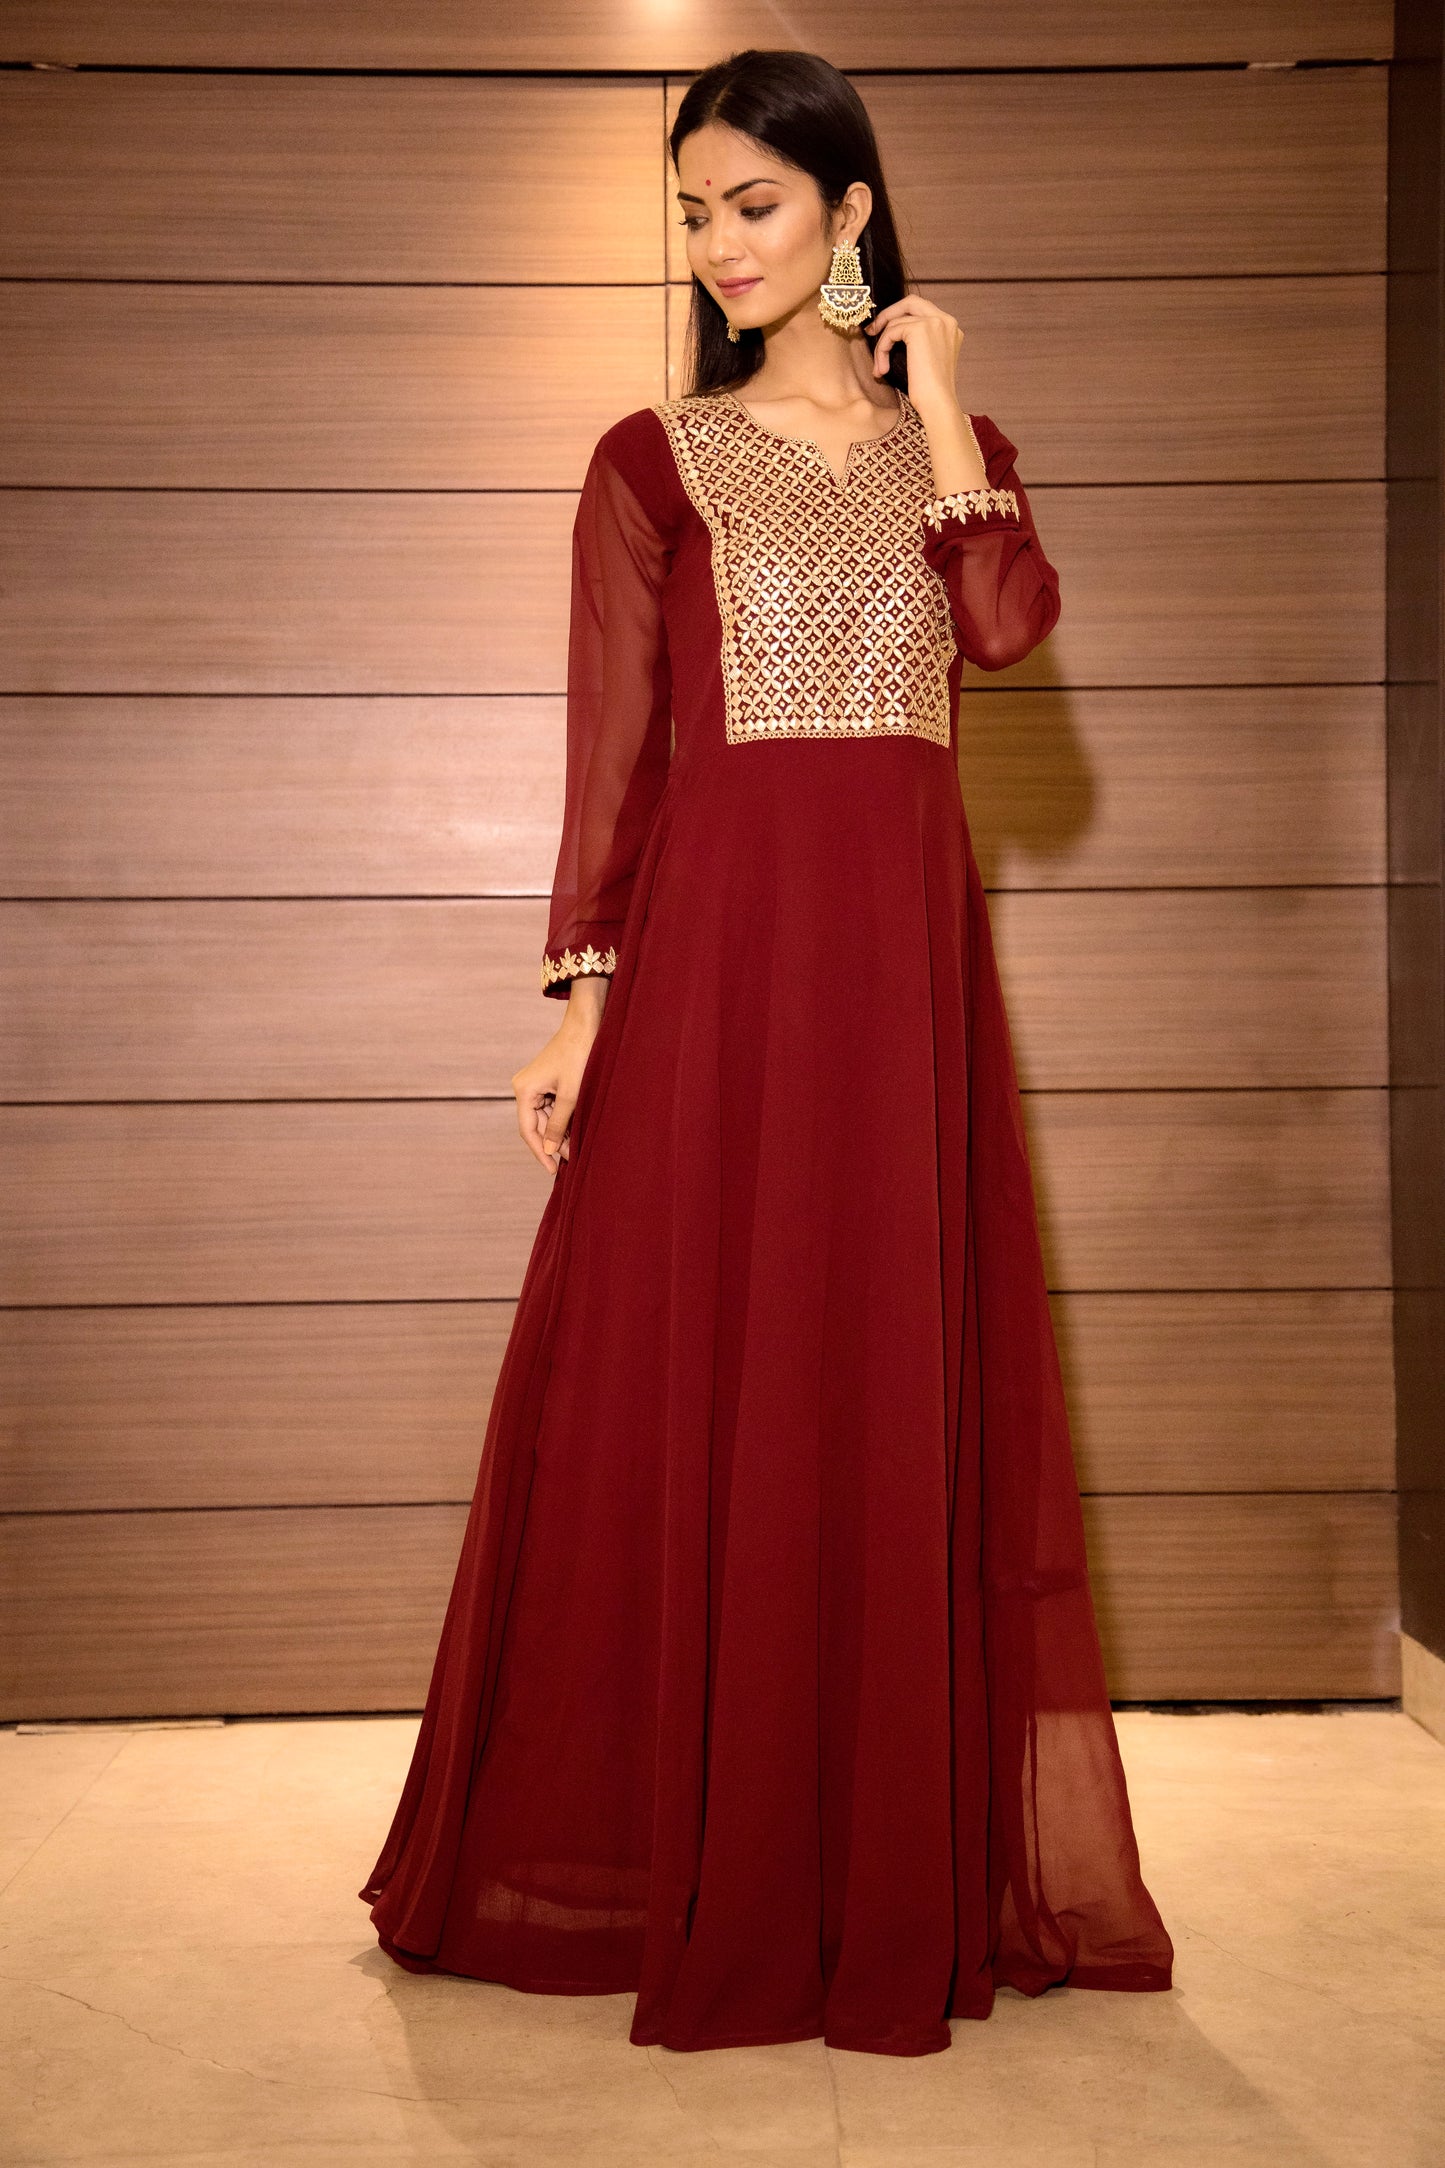 Party wear gown with gota patti hand embellishment.